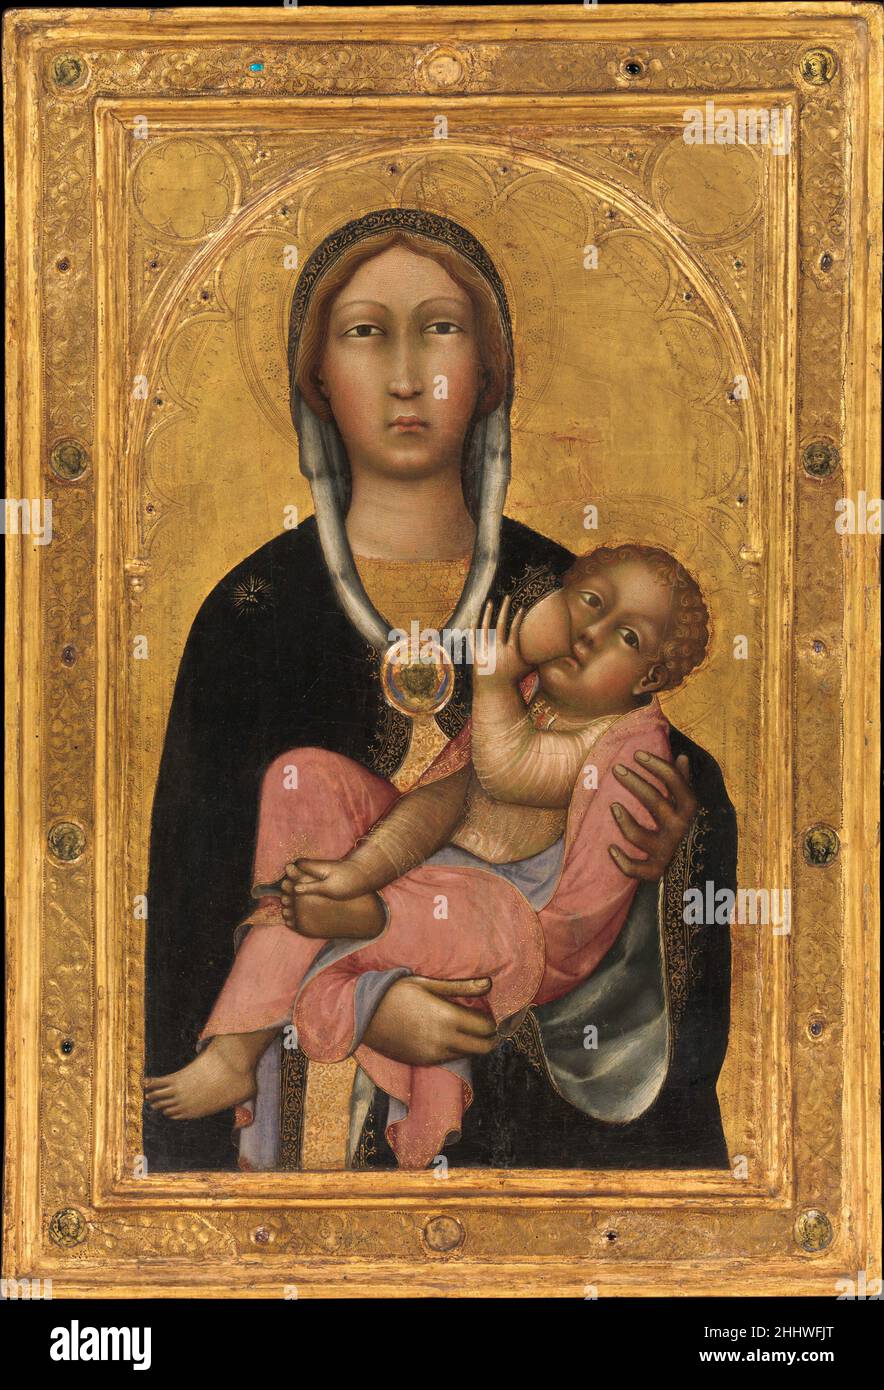 Madonna and Child 1370s Paolo di Giovanni Fei Italian This independent panel of the Madonna nursing her child is among the masterpieces of fourteenth-century Sienese painting. It transforms a common, maternal activity into an icon of devotion and is painted with Fei's special feeling for decorative richness and technical refinement. The engaged frame is original, as are the gold-backed, glass medallions with images of the Annunciation, saints, and the head of Christ—a technique known as verre églomisé. The picture may originally have stood on an altar or hung in a domestic interior.. Madonna a Stock Photo